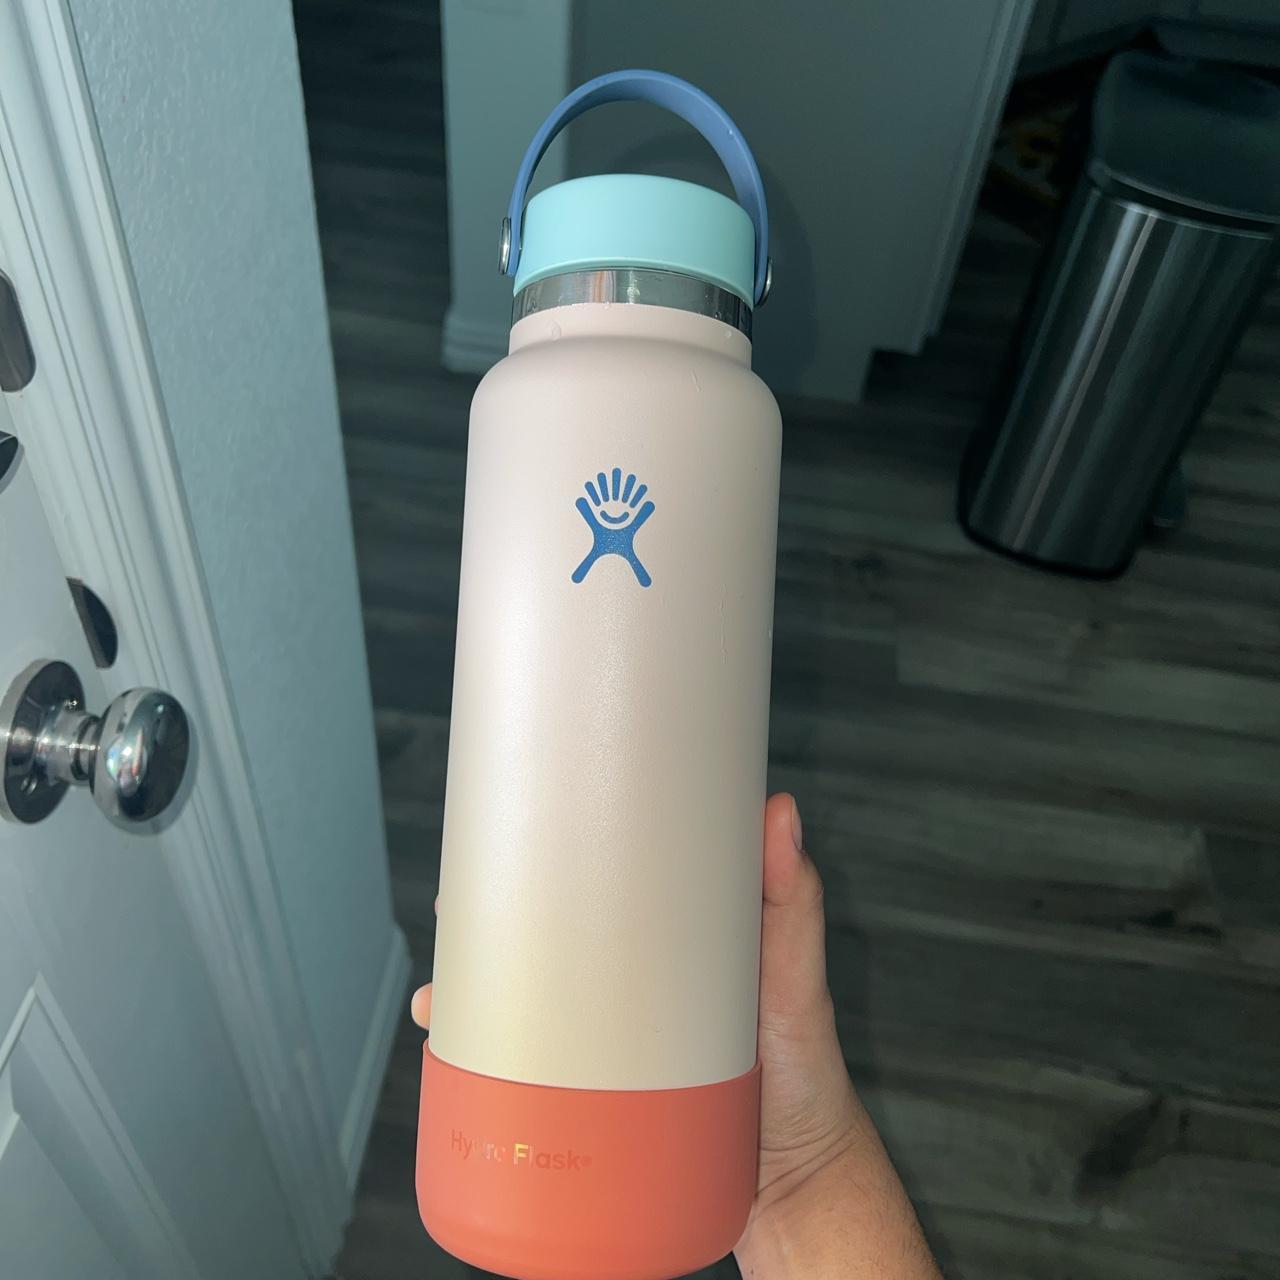 i'm obsessed with this color #hydroflask #newhydroflask